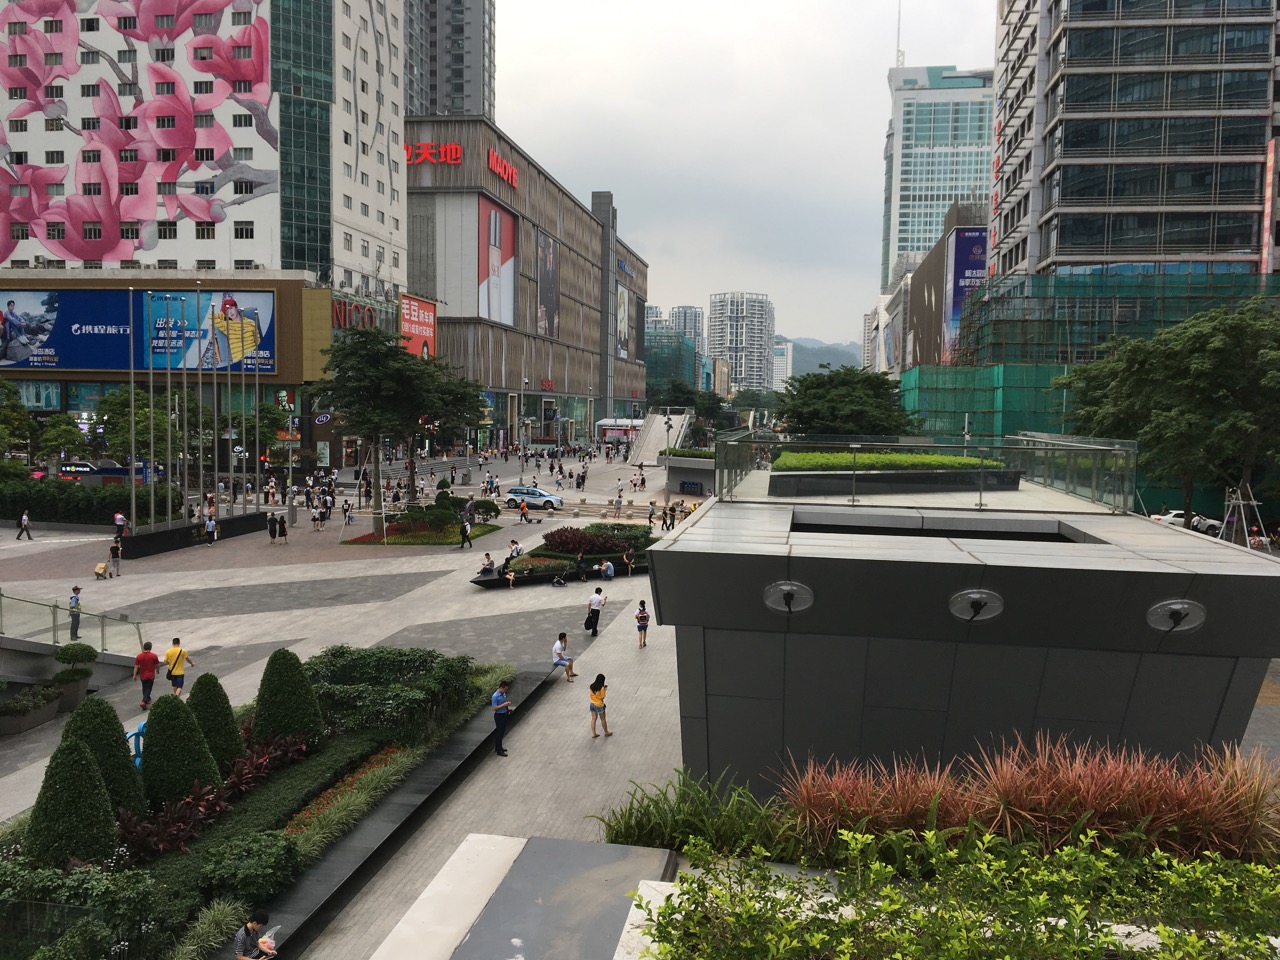 A recent green pedestrian walkway between buildings in Shenzhen, China. Each building contains hundreds or thousands of small electronics businesses. 